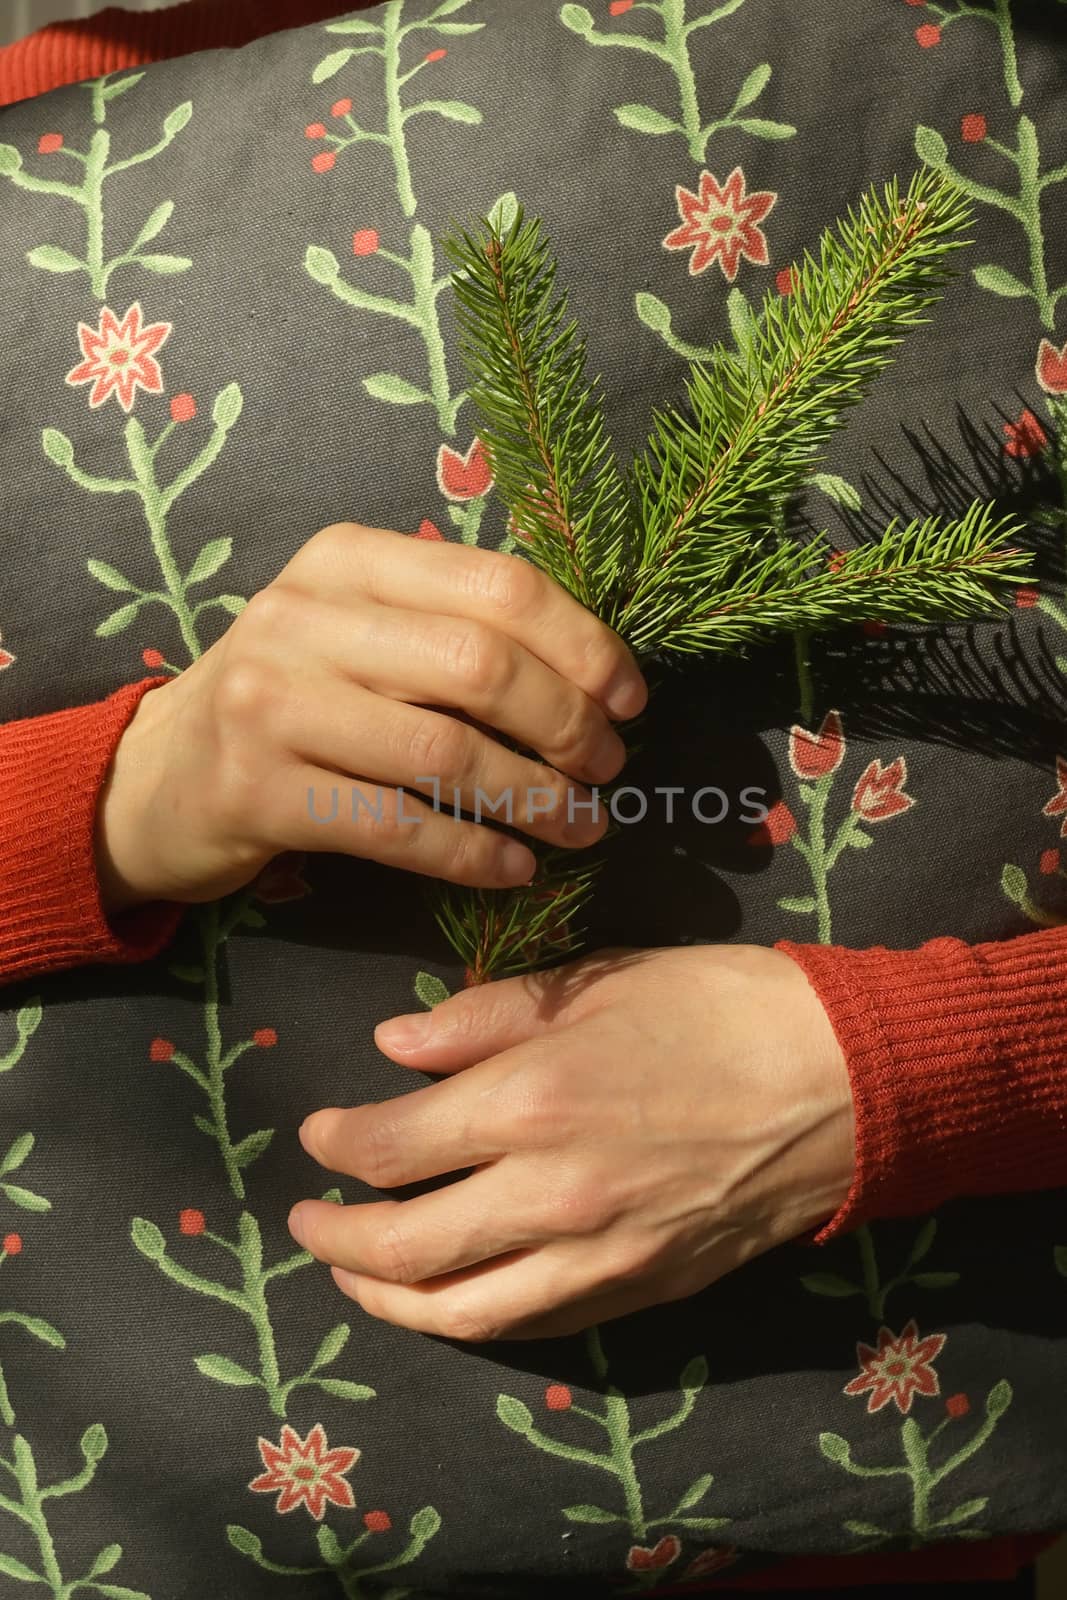 Woman is holding pine tree branch and pillow